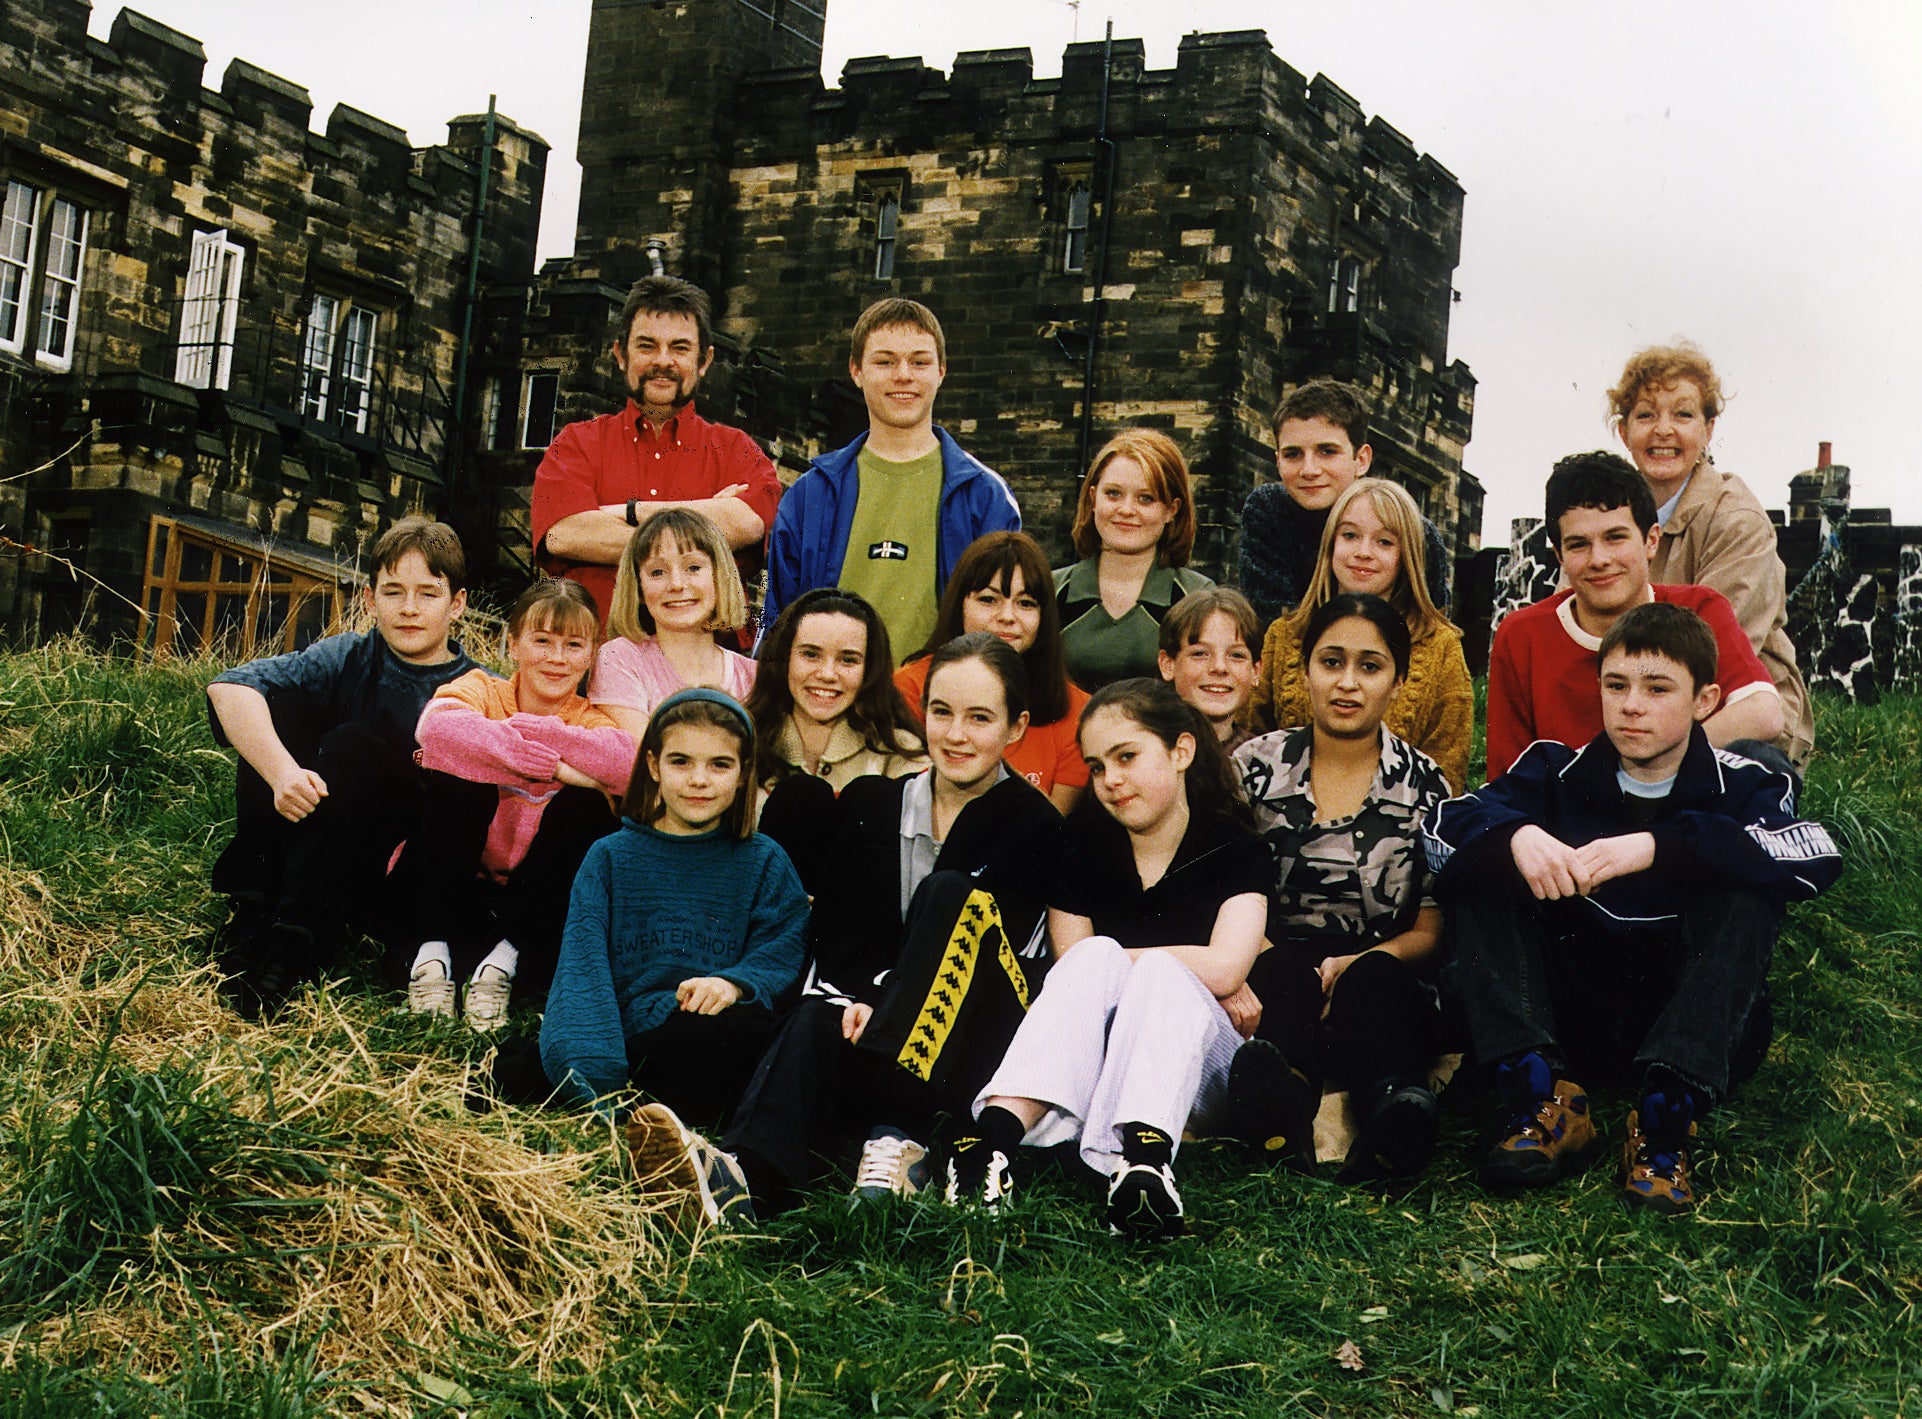 Ant and Dec pictured among the cast of the 1989 children’s drama ‘Byker Grove’